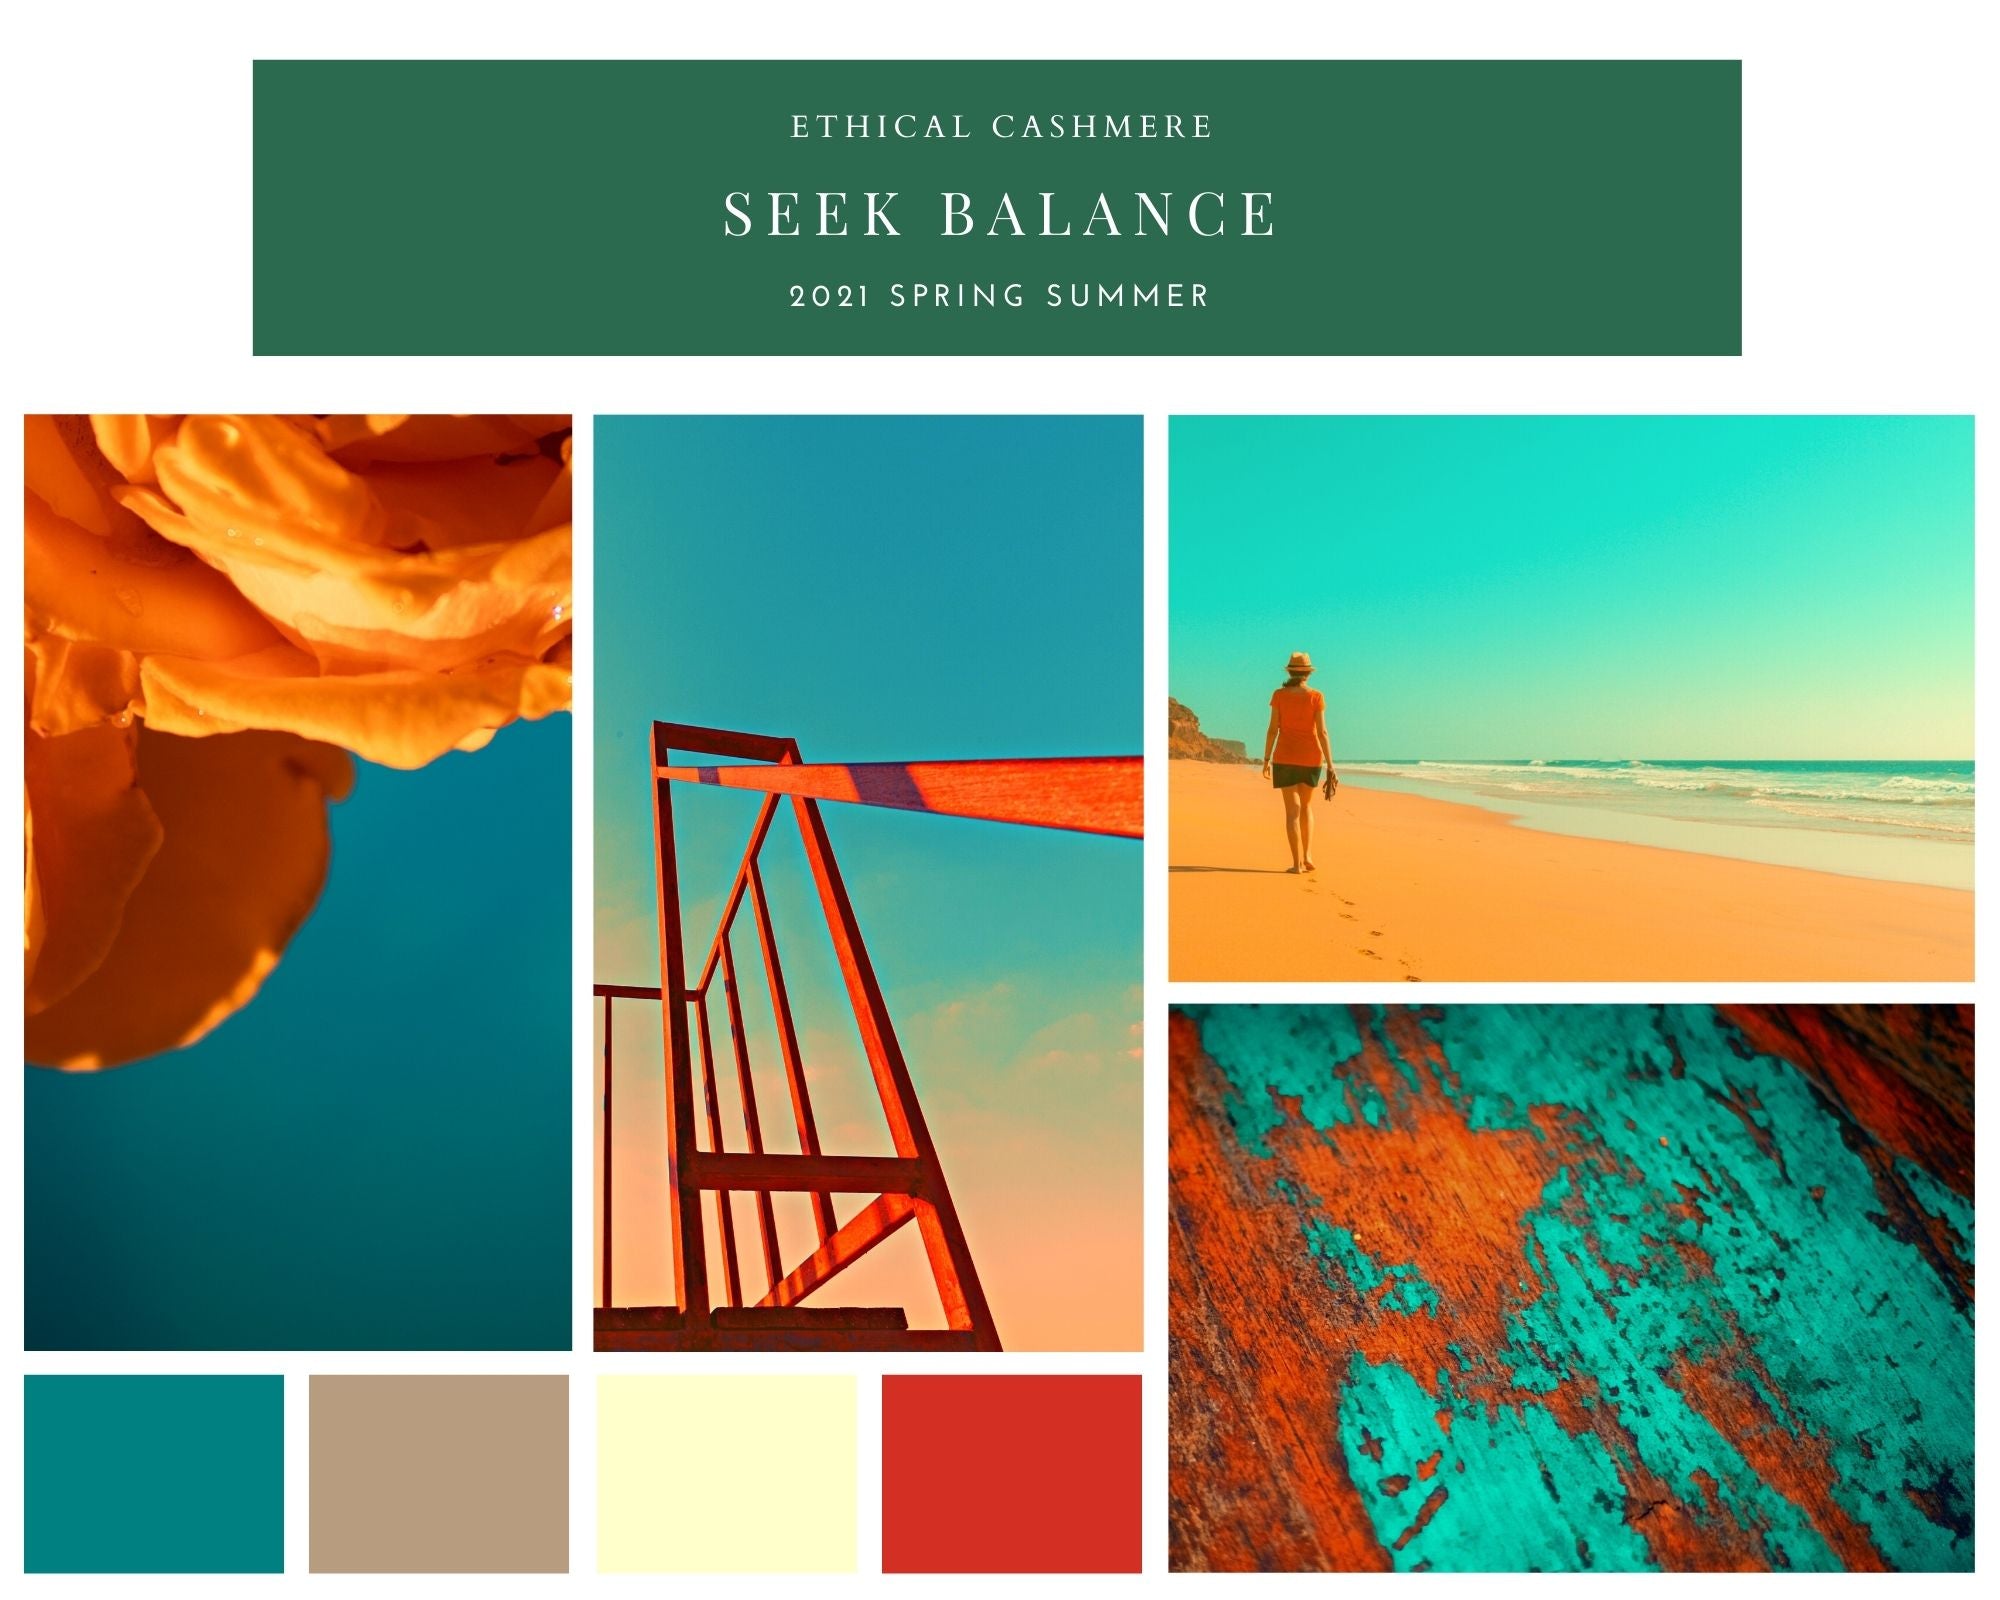 Mood board inspired by teal and orange themes for Ethical Cashmere's Spring 2021 season